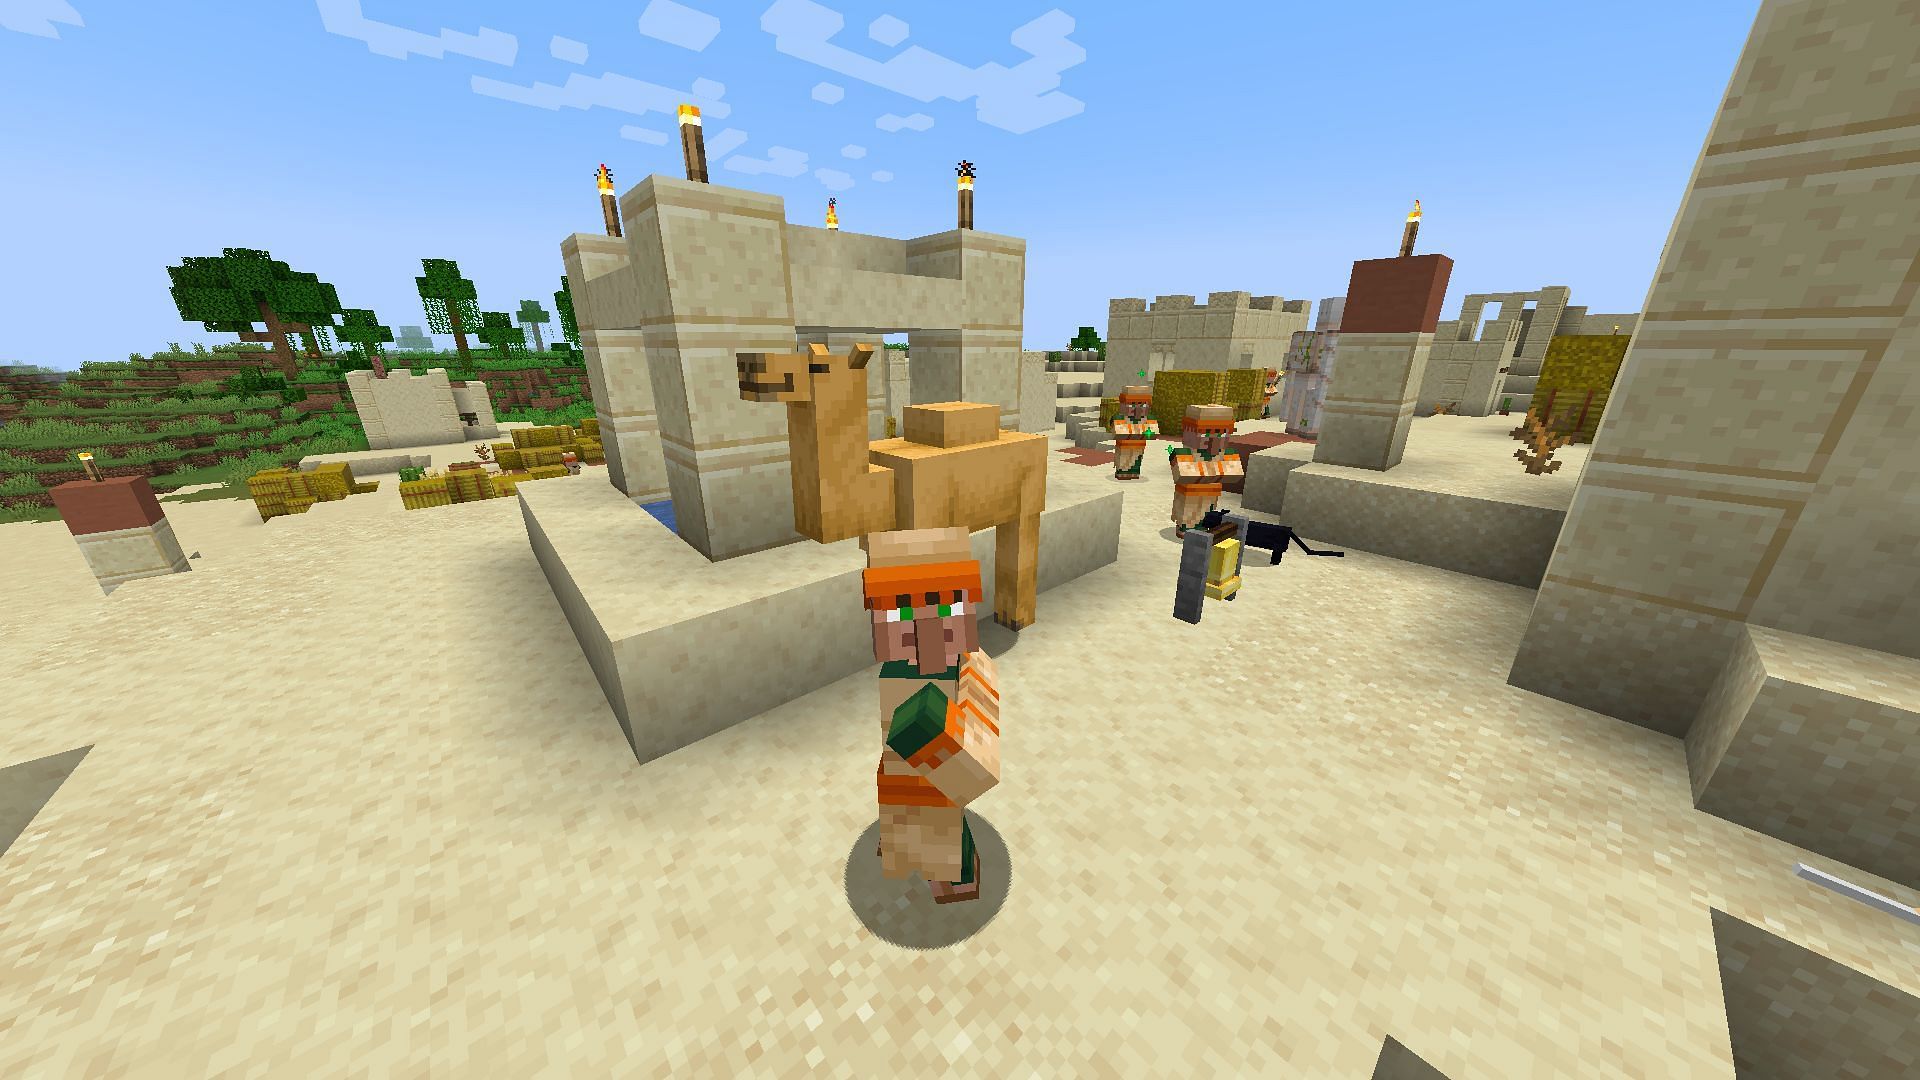 Desert village is the only structure where camels will spawn in Minecraft 1.20 update (Image via Mojang)